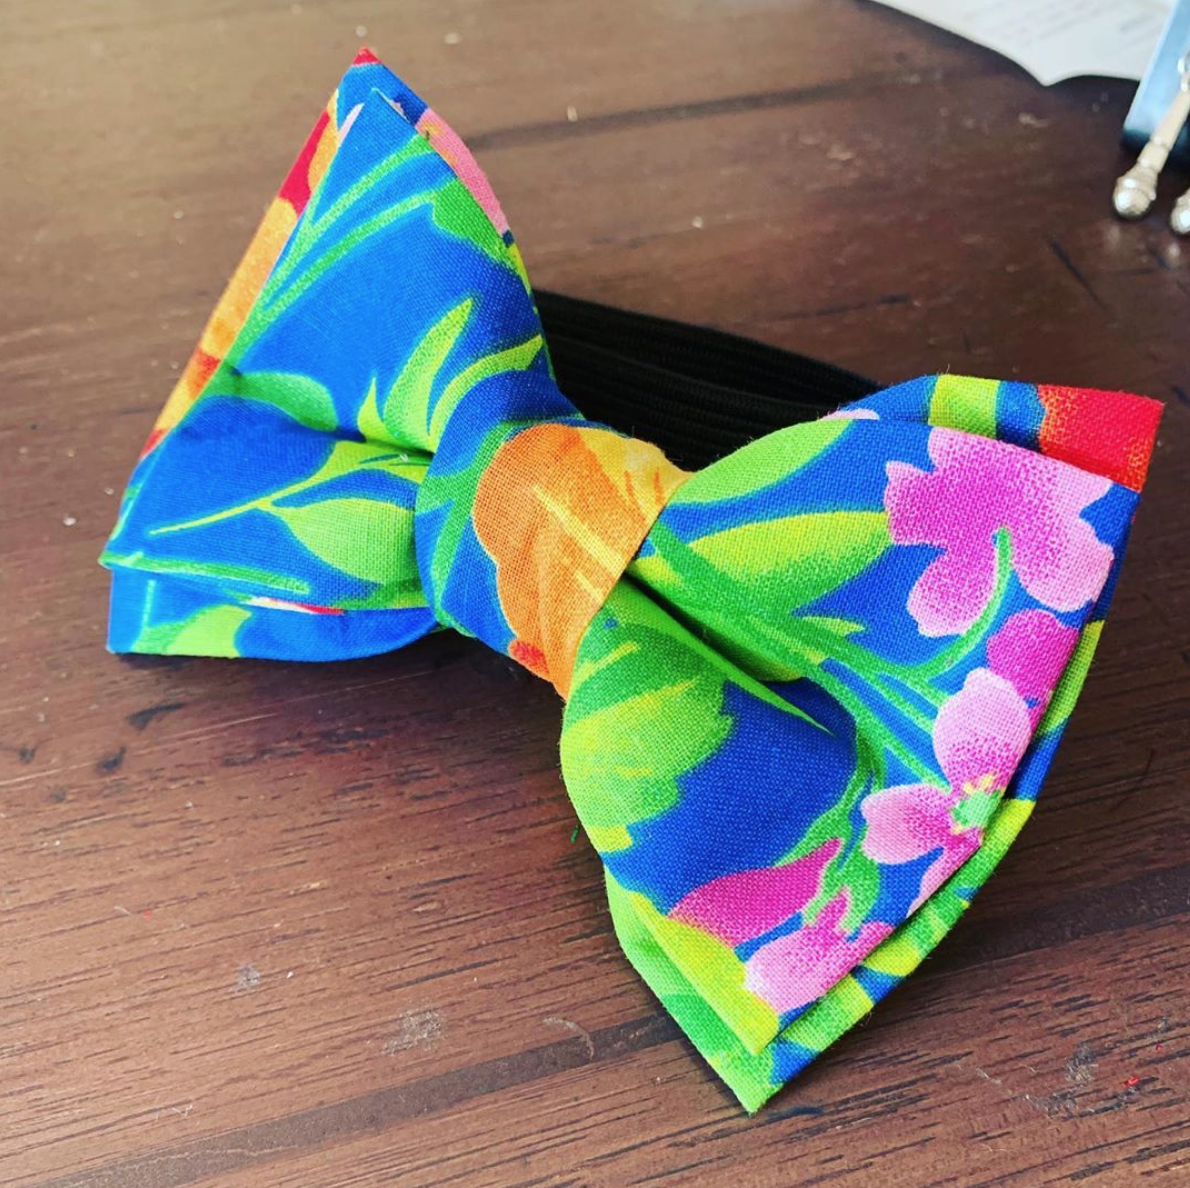 Custom hand made bowties and jewelry from New Orleans